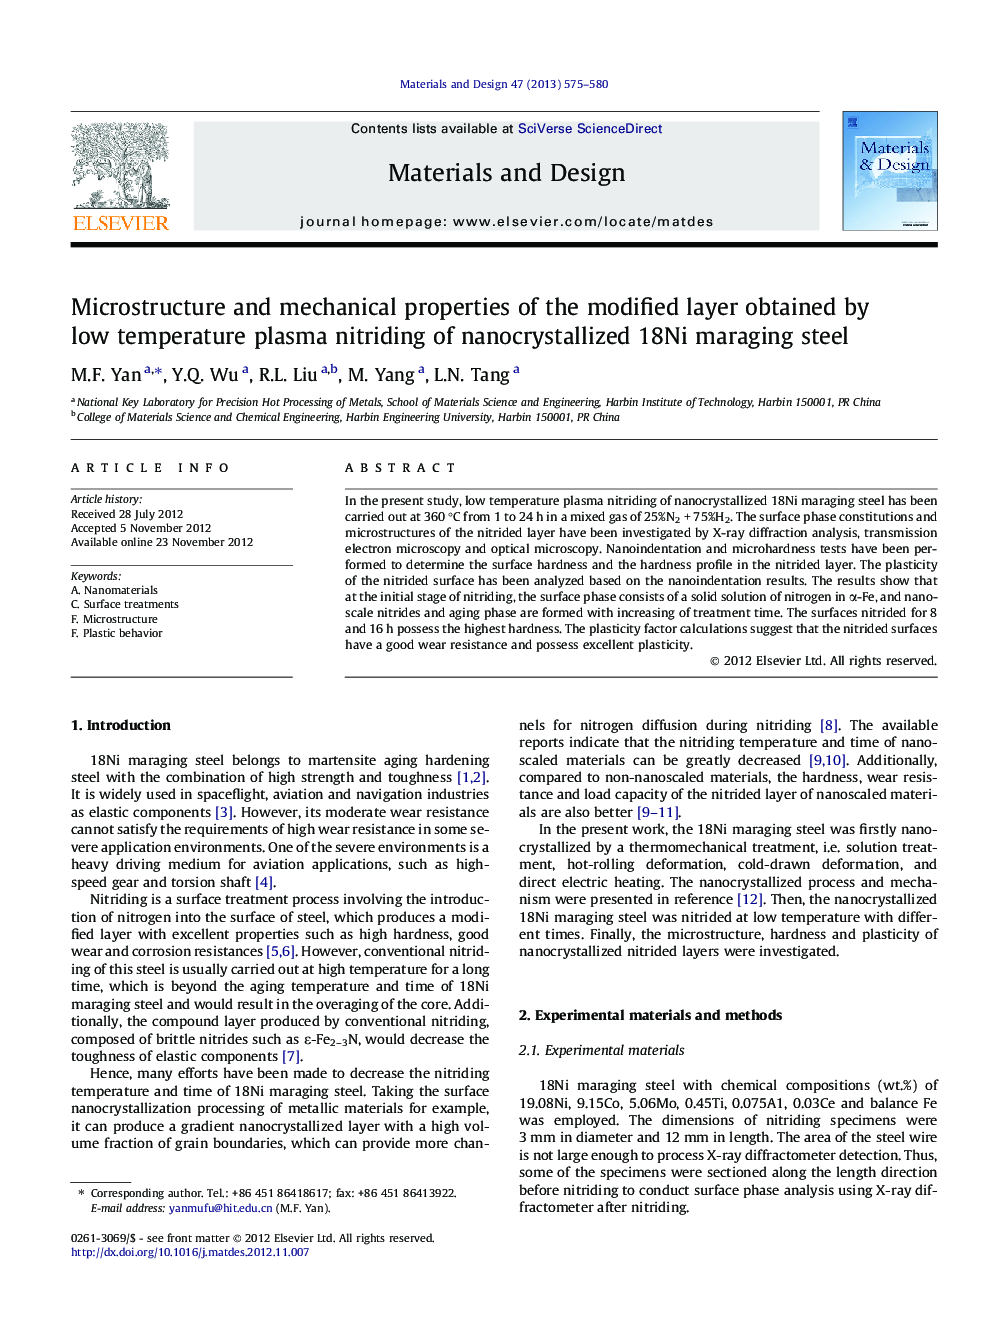 Microstructure and mechanical properties of the modified layer obtained by low temperature plasma nitriding of nanocrystallized 18Ni maraging steel